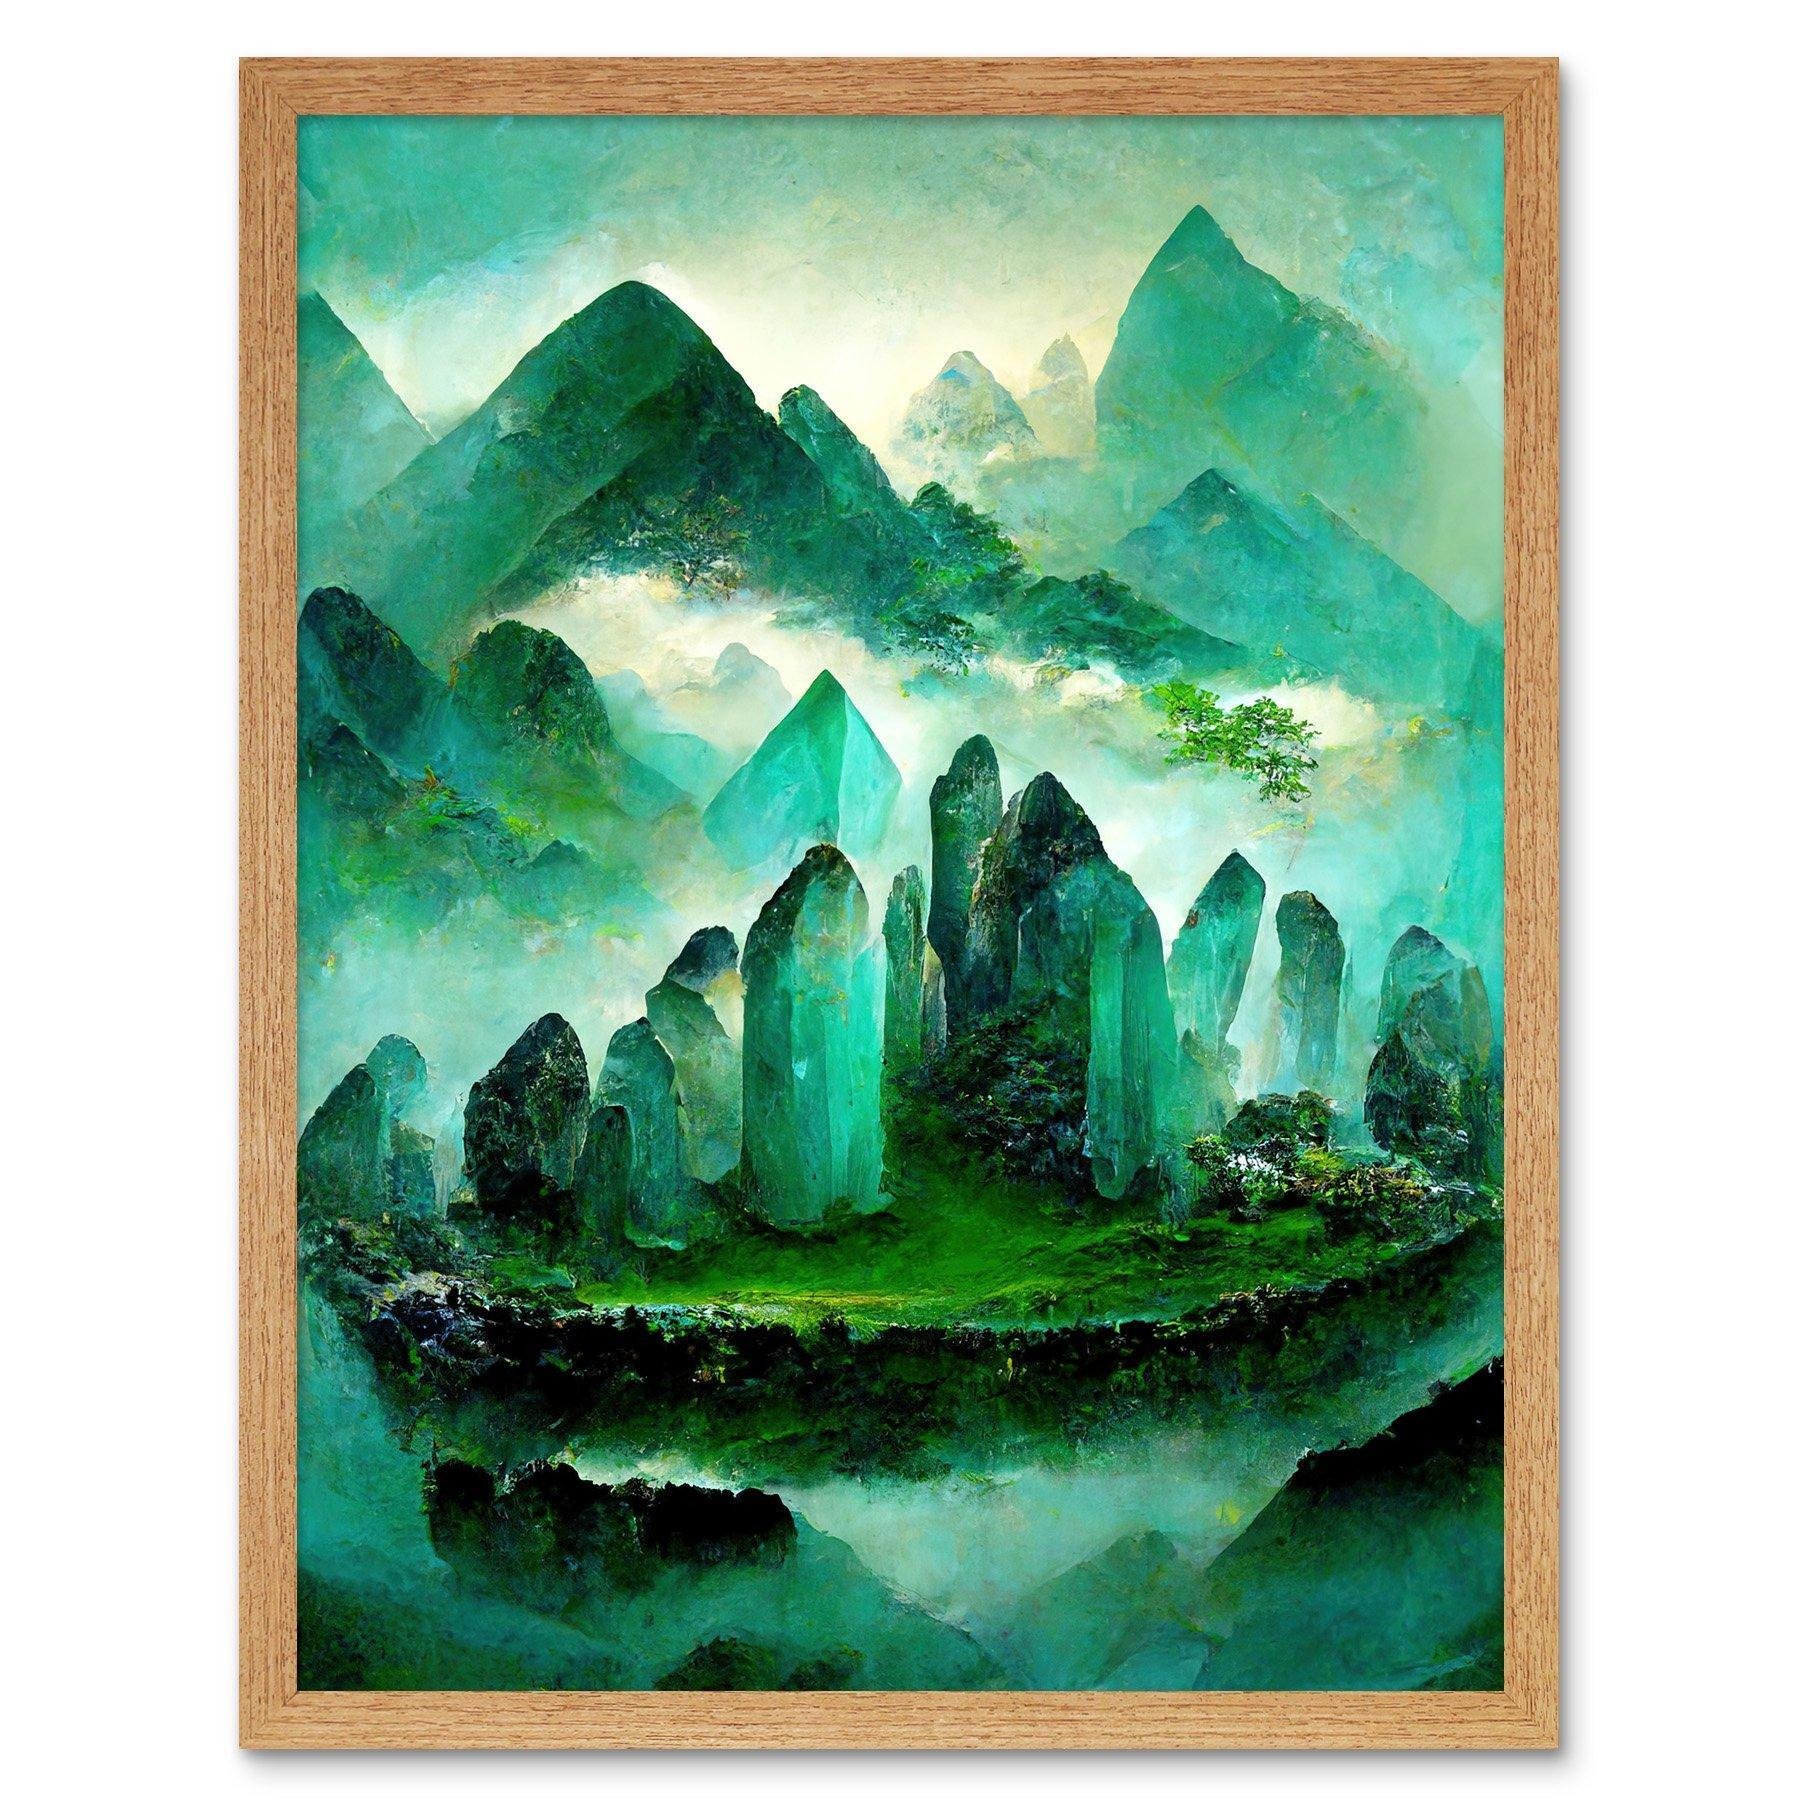 Mystical New Age Crystal Jade Green Landscape Painting Art Print Framed Poster Wall Decor 12x16 inch - image 1